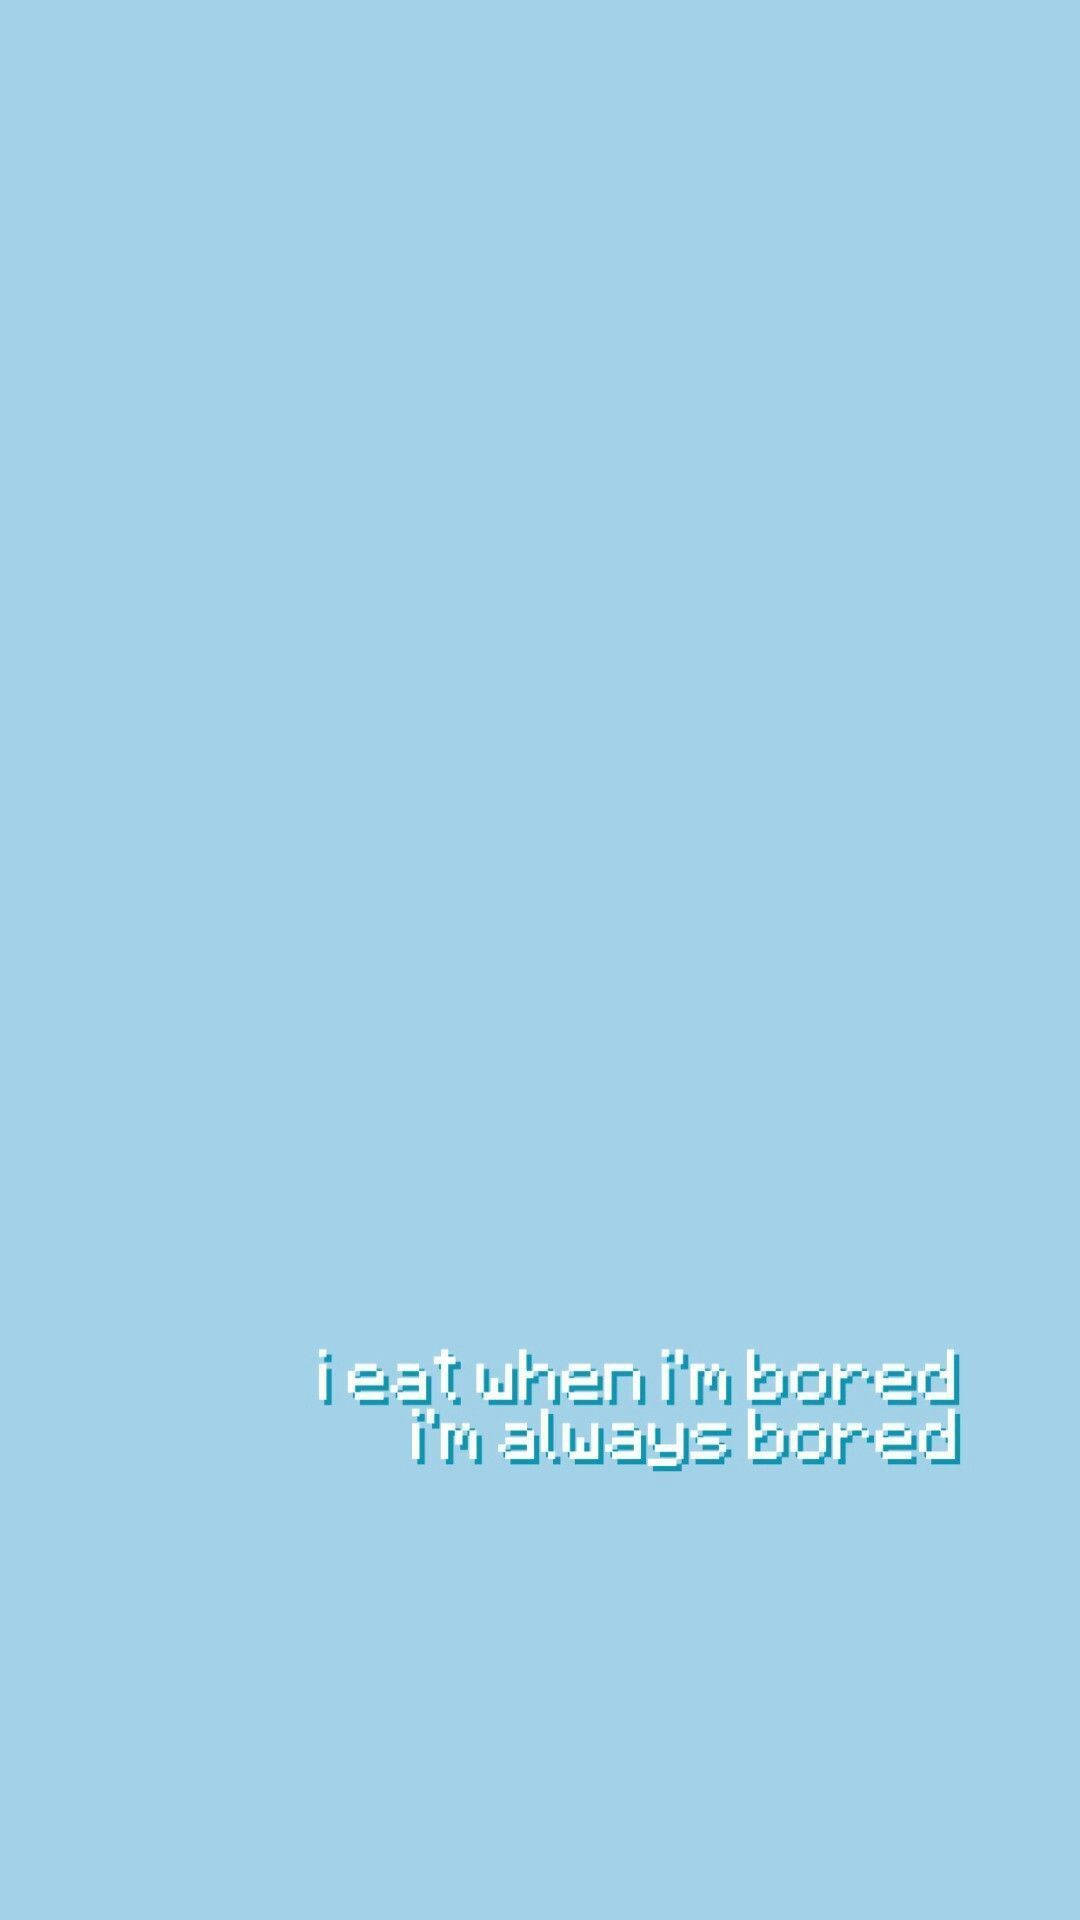 1080X1920 Baby Blue Wallpaper and Background